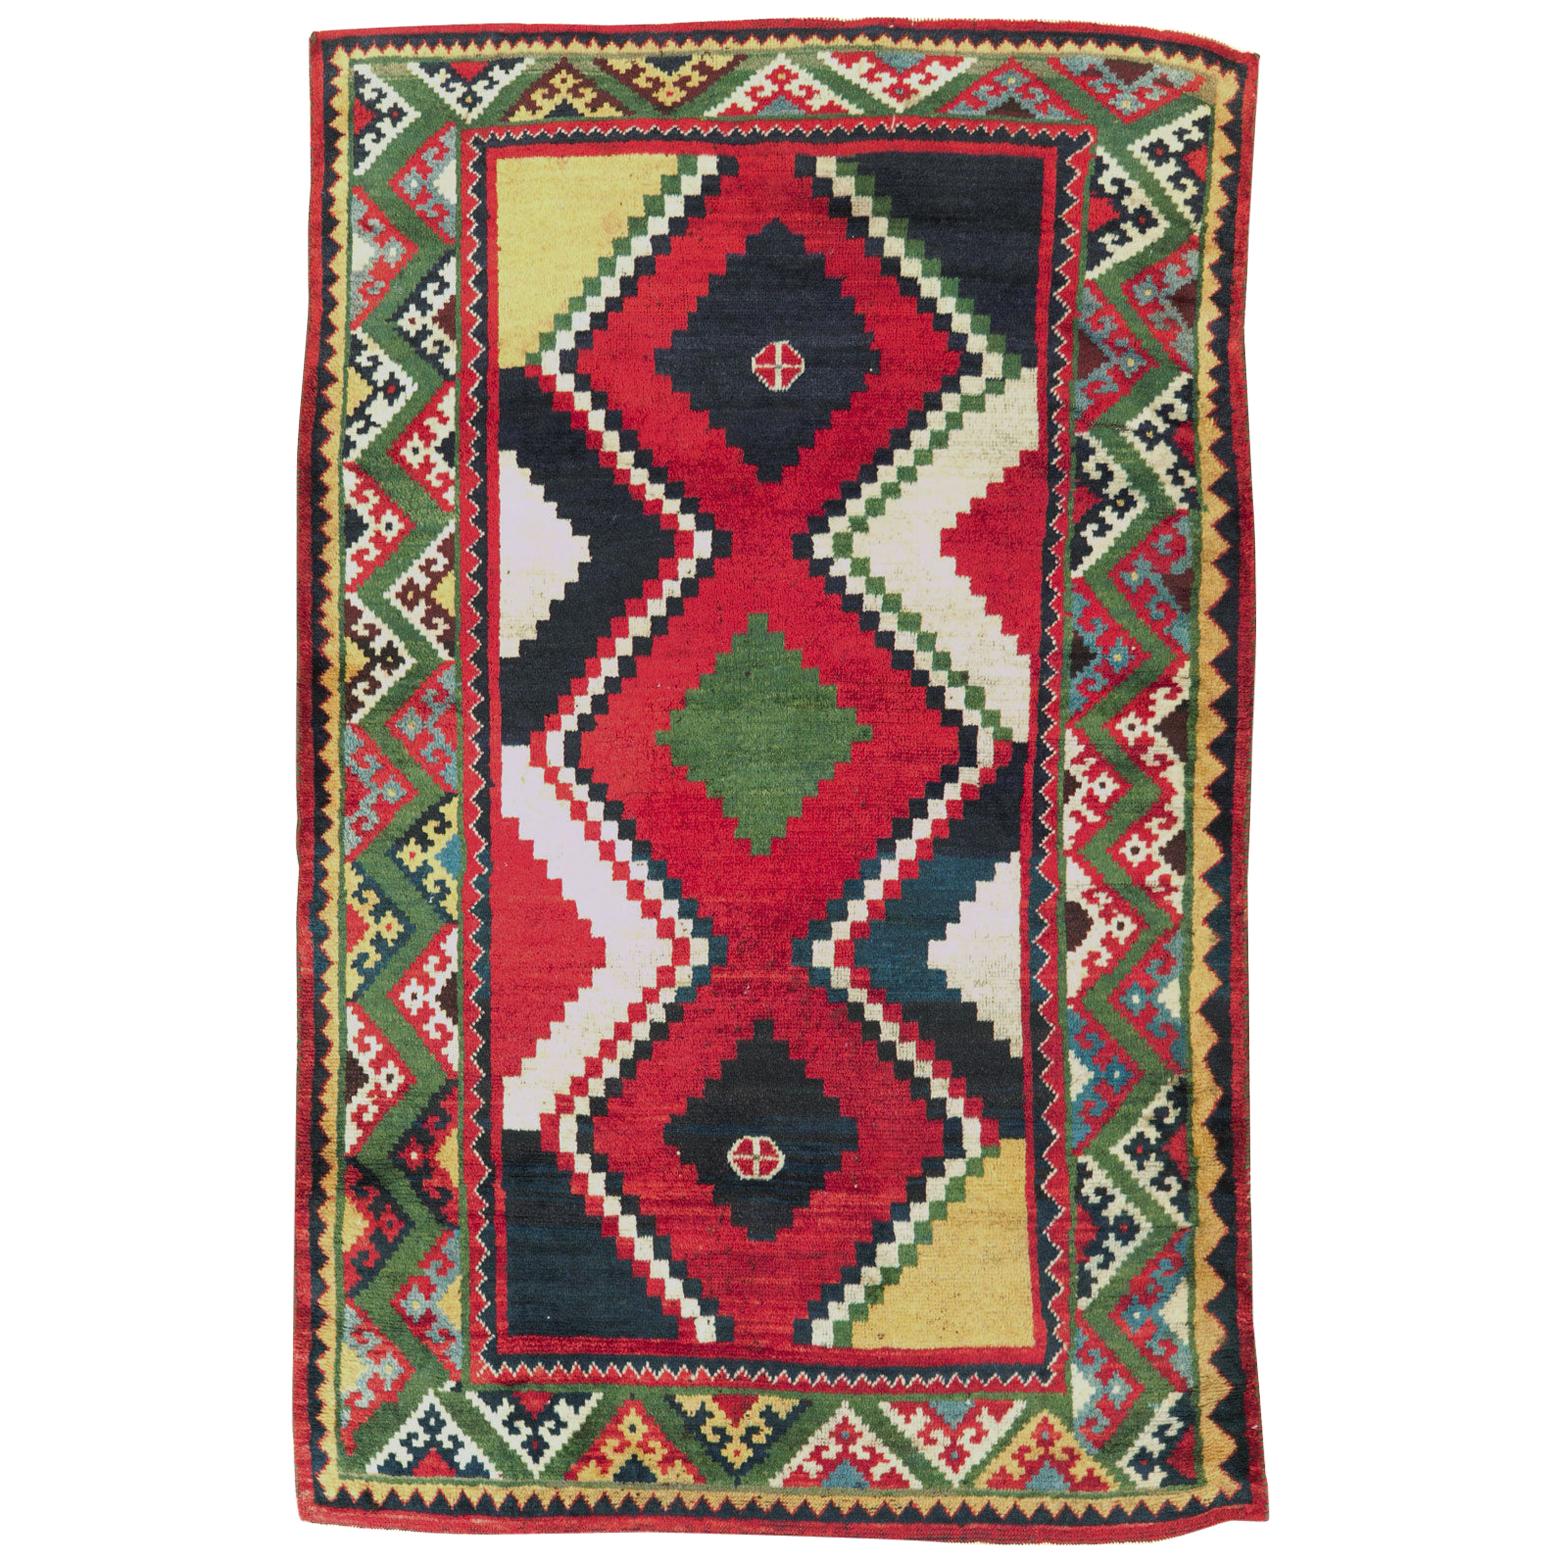 Late 20th Century Handmade Persian Tribal Gabbeh Accent Rug in Red and Green